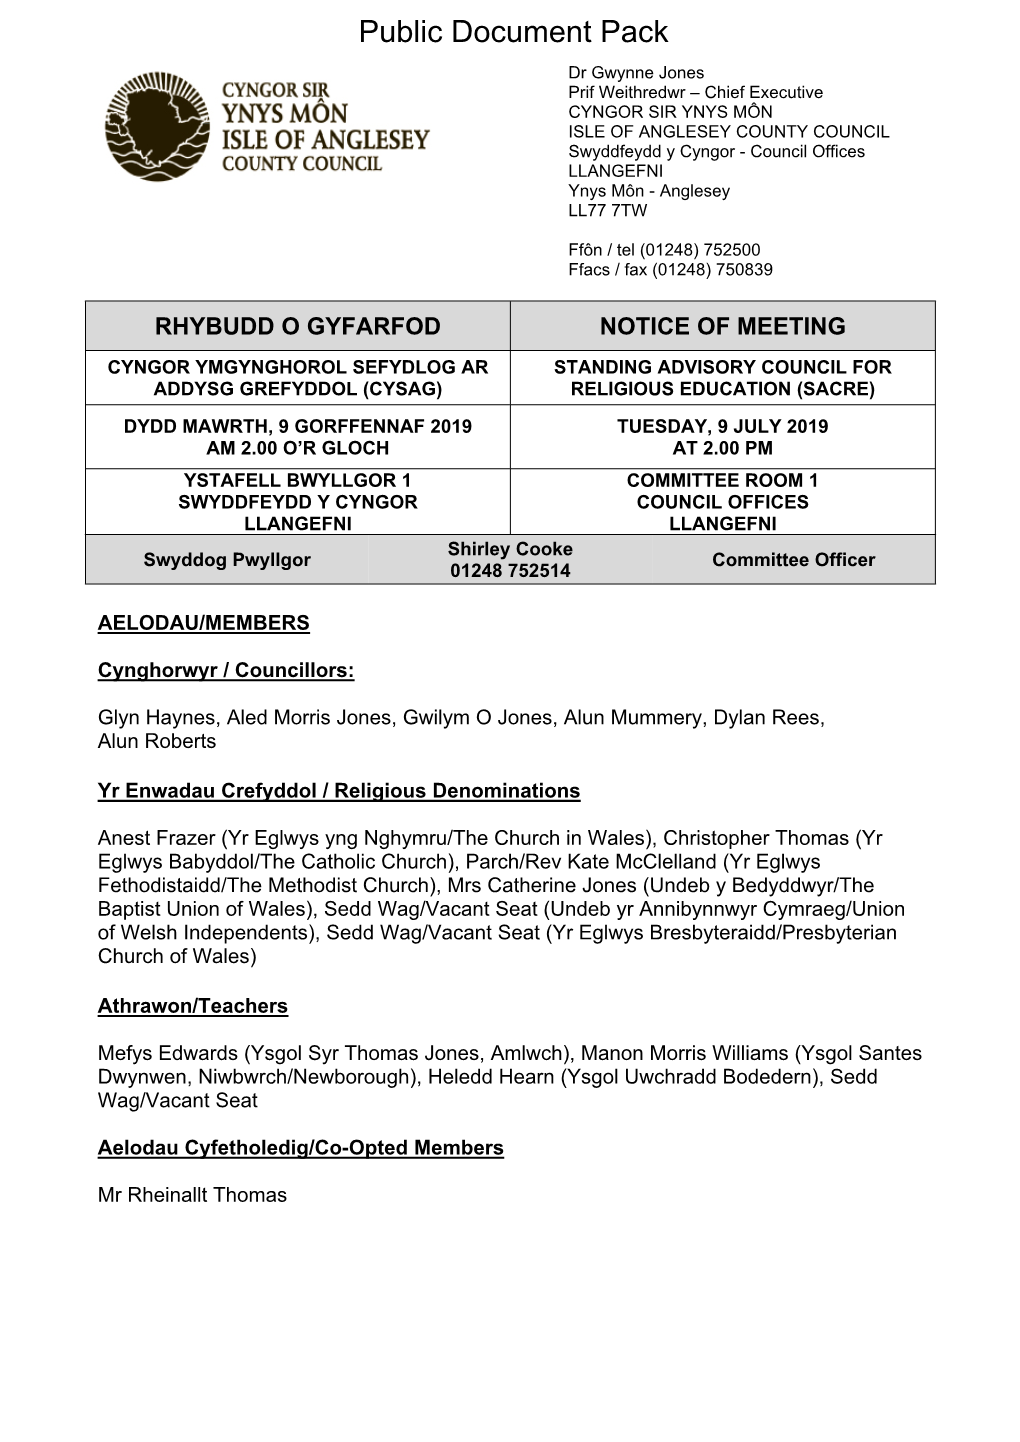 (Public Pack)Agenda Document for Standing Advisory Council On